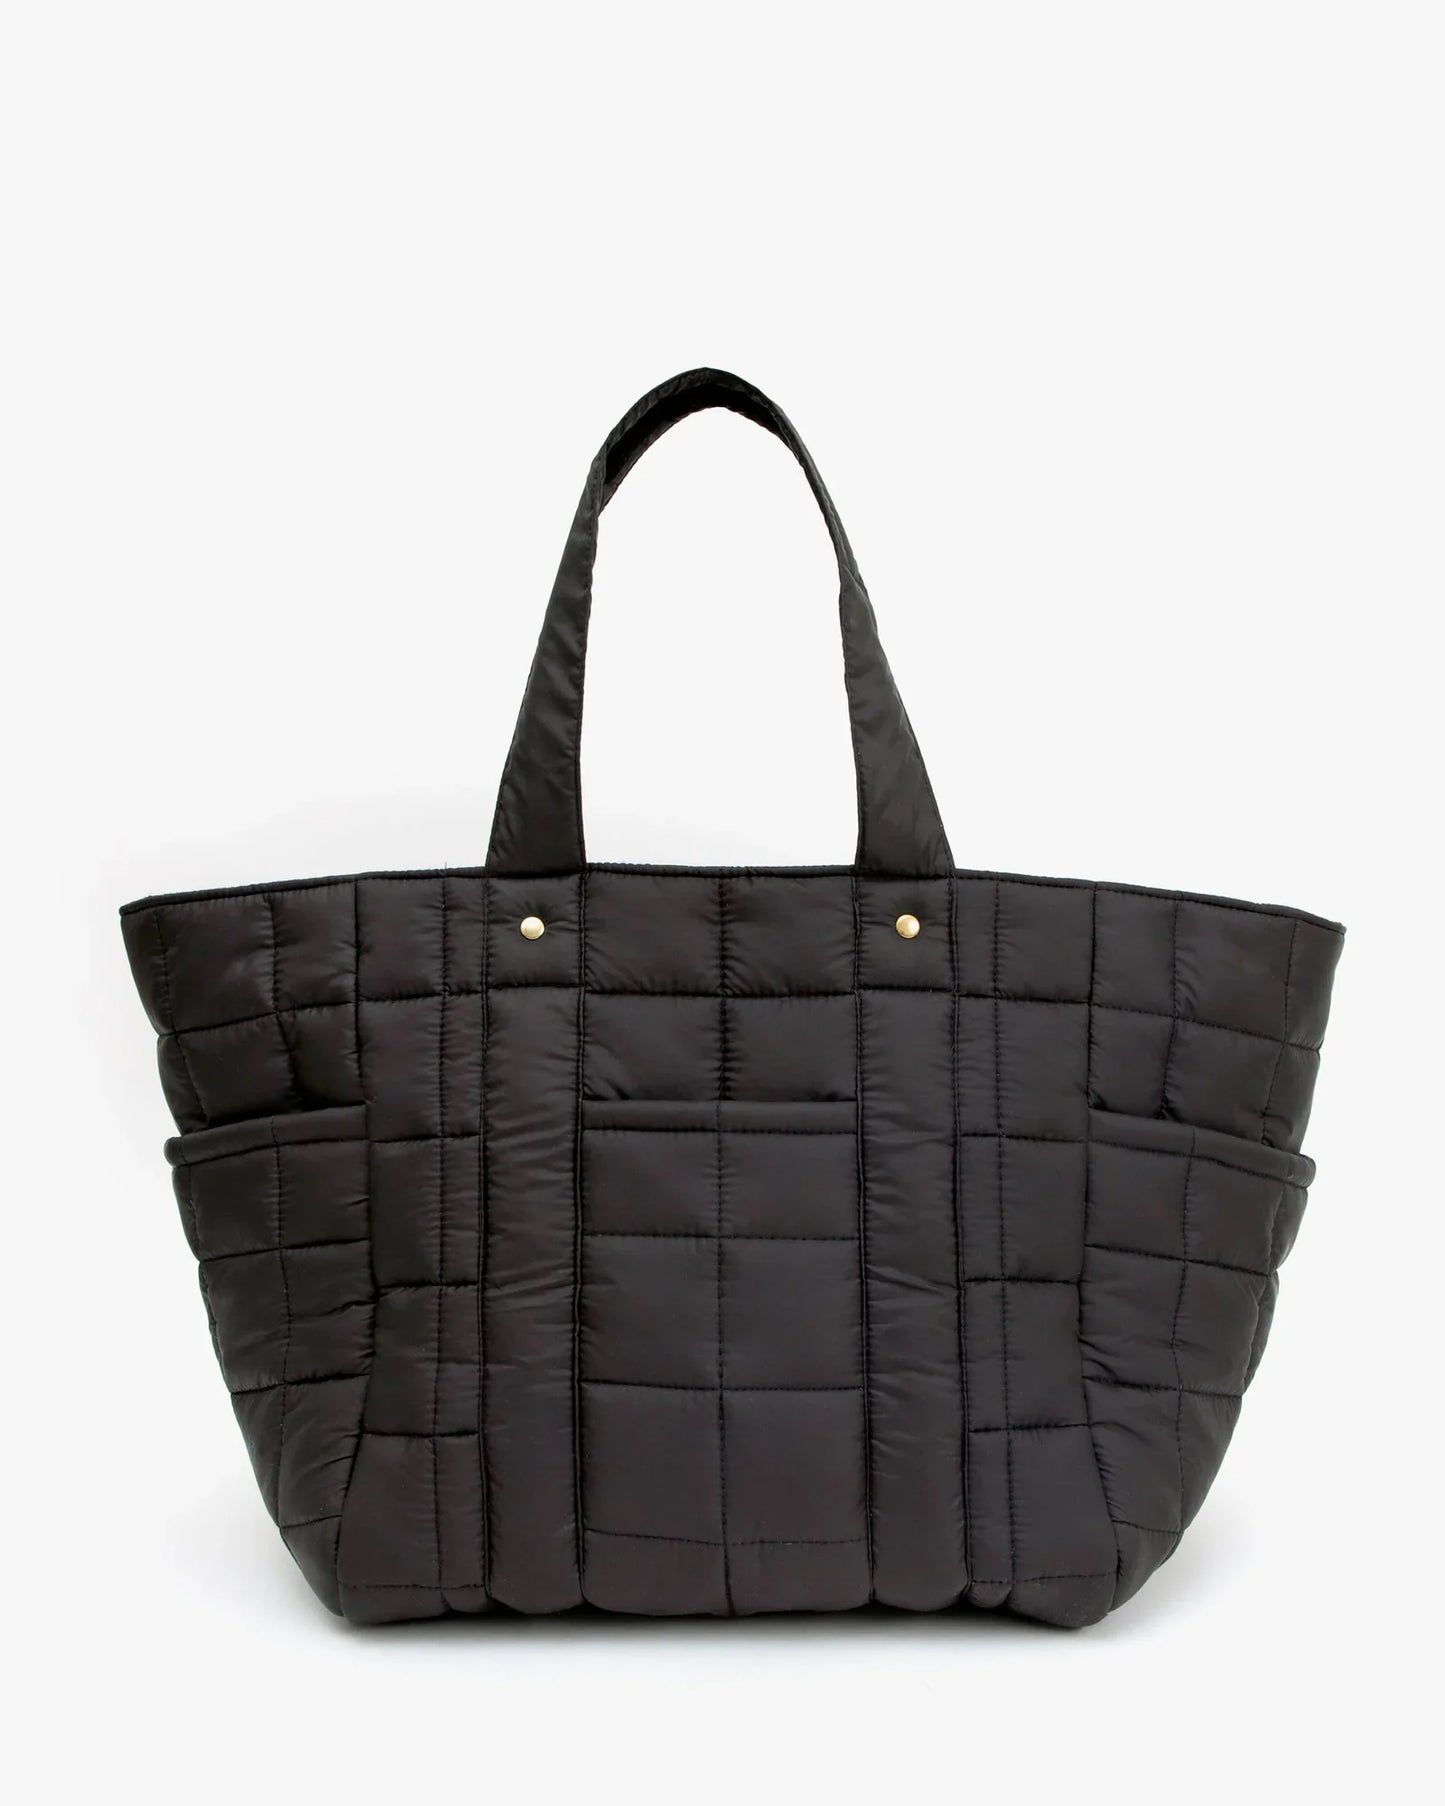 Clare V Le Box Tote Sportif, Quilted Cloud Nylon